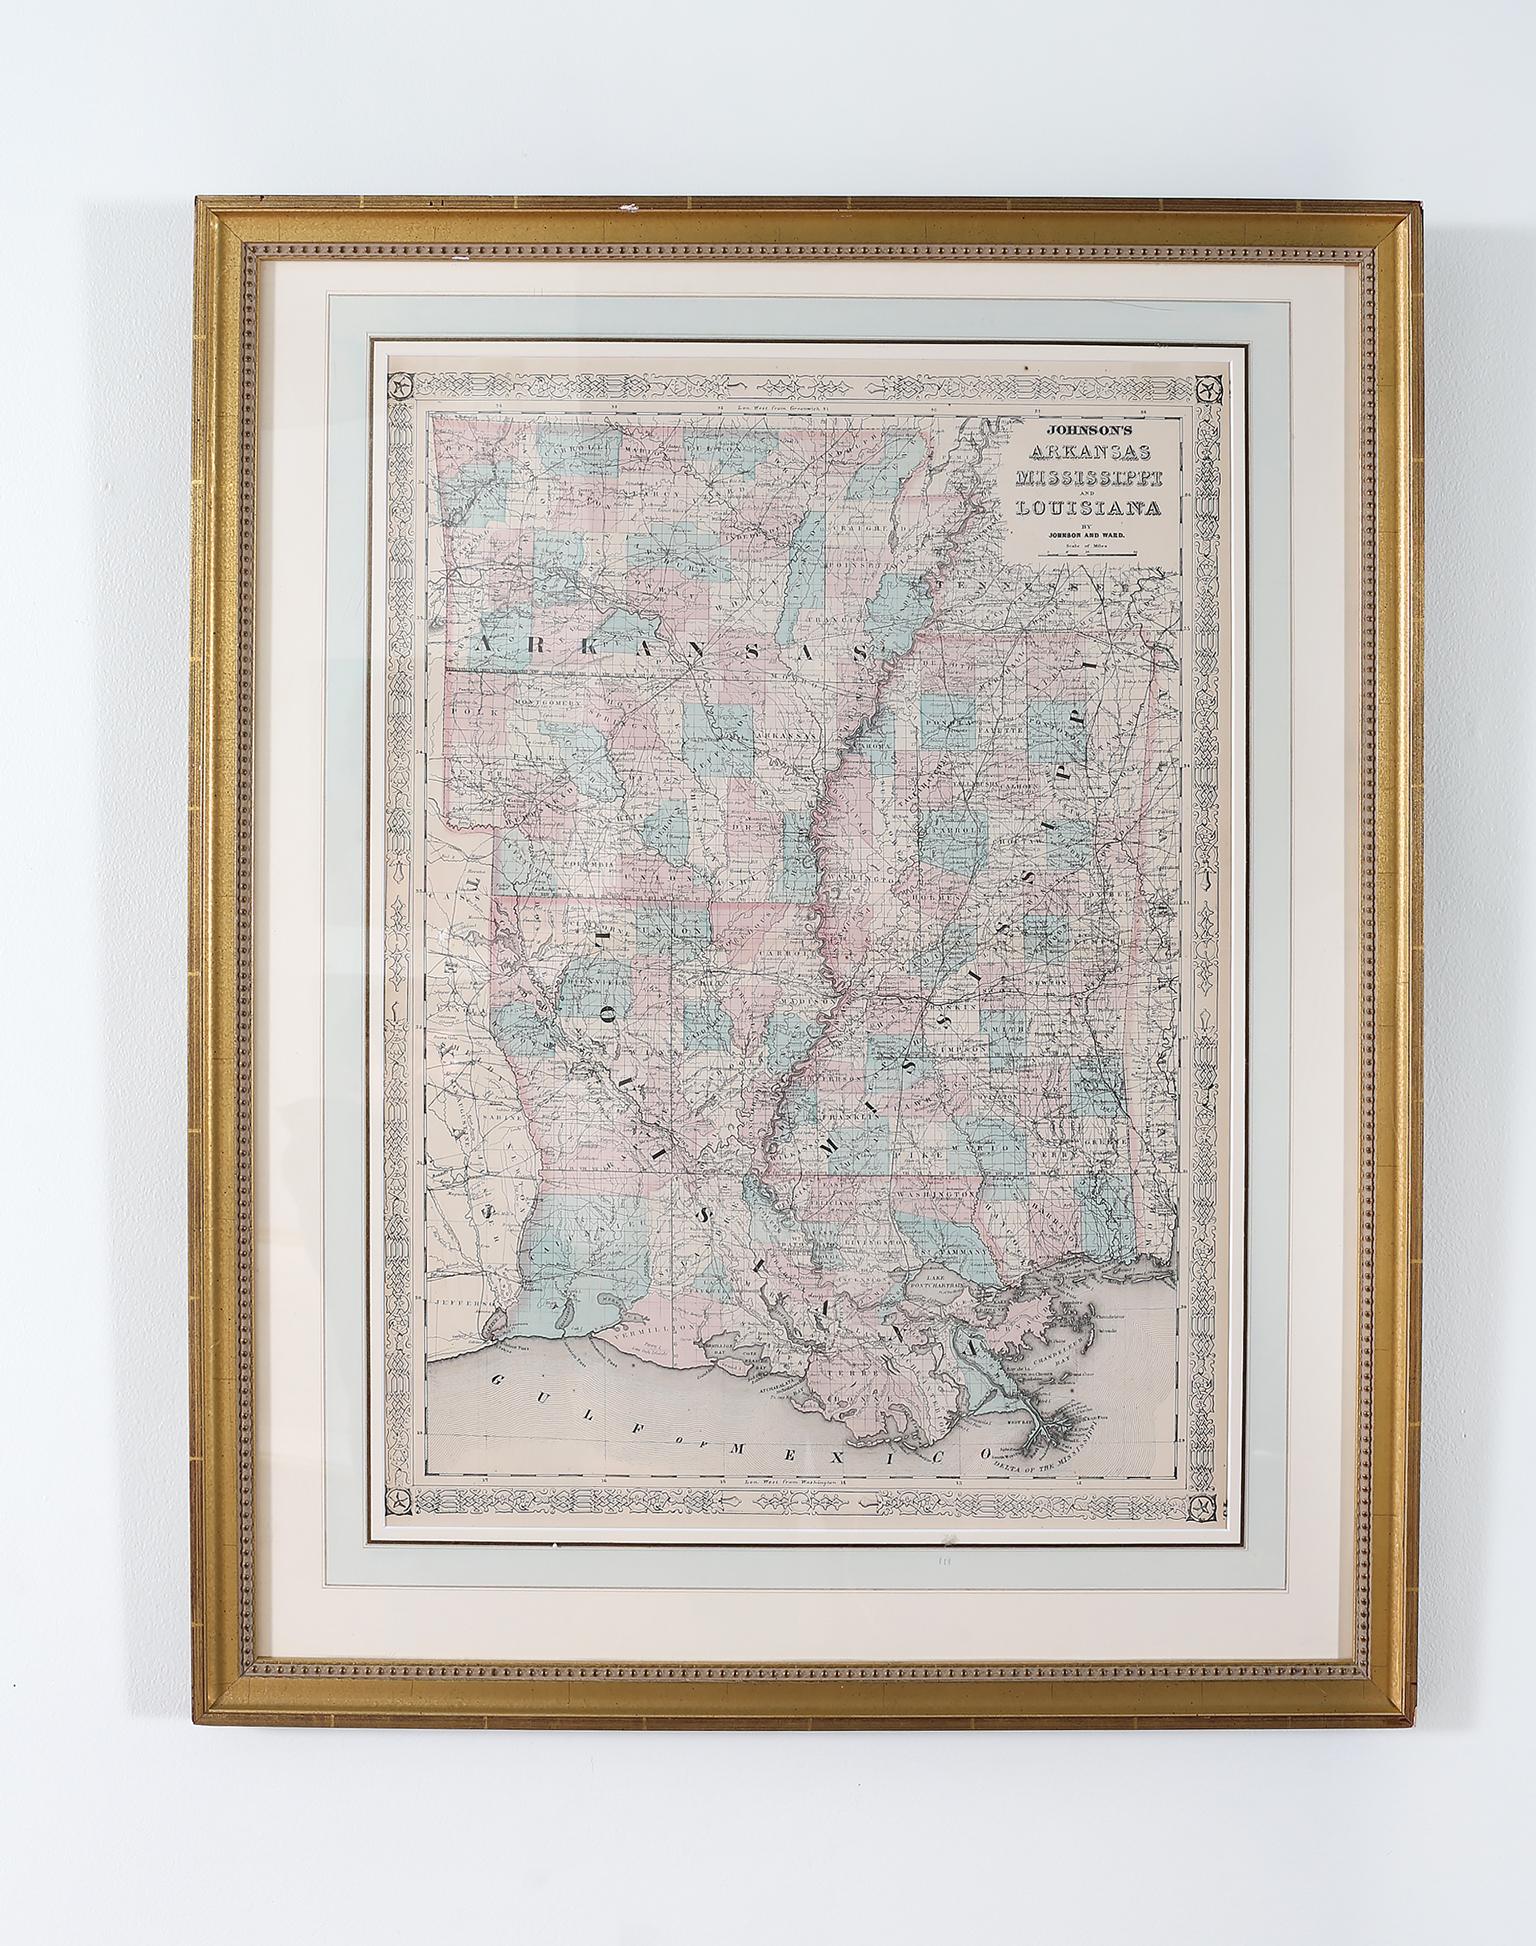 Giltwood Framed / Matted Library / Study Room Map 3